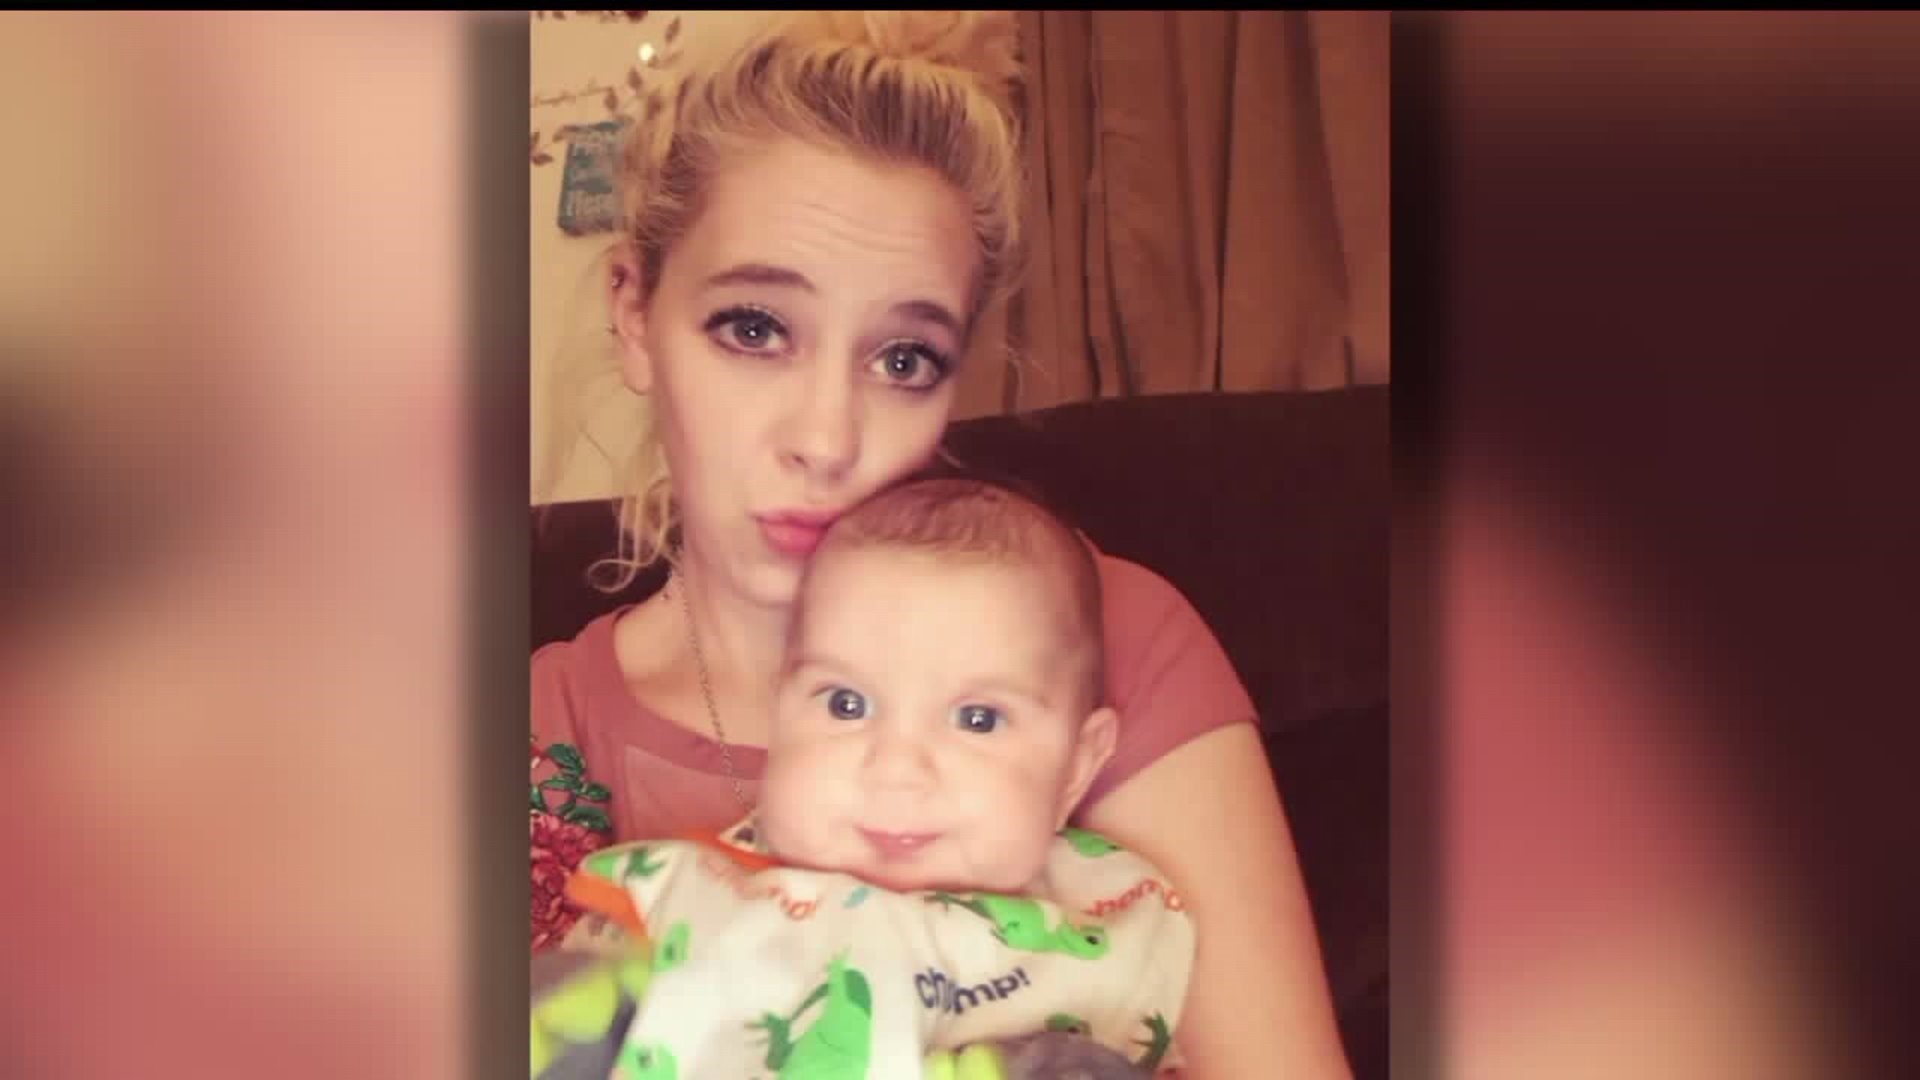 Mother of woman shot and killed while holding baby opens up